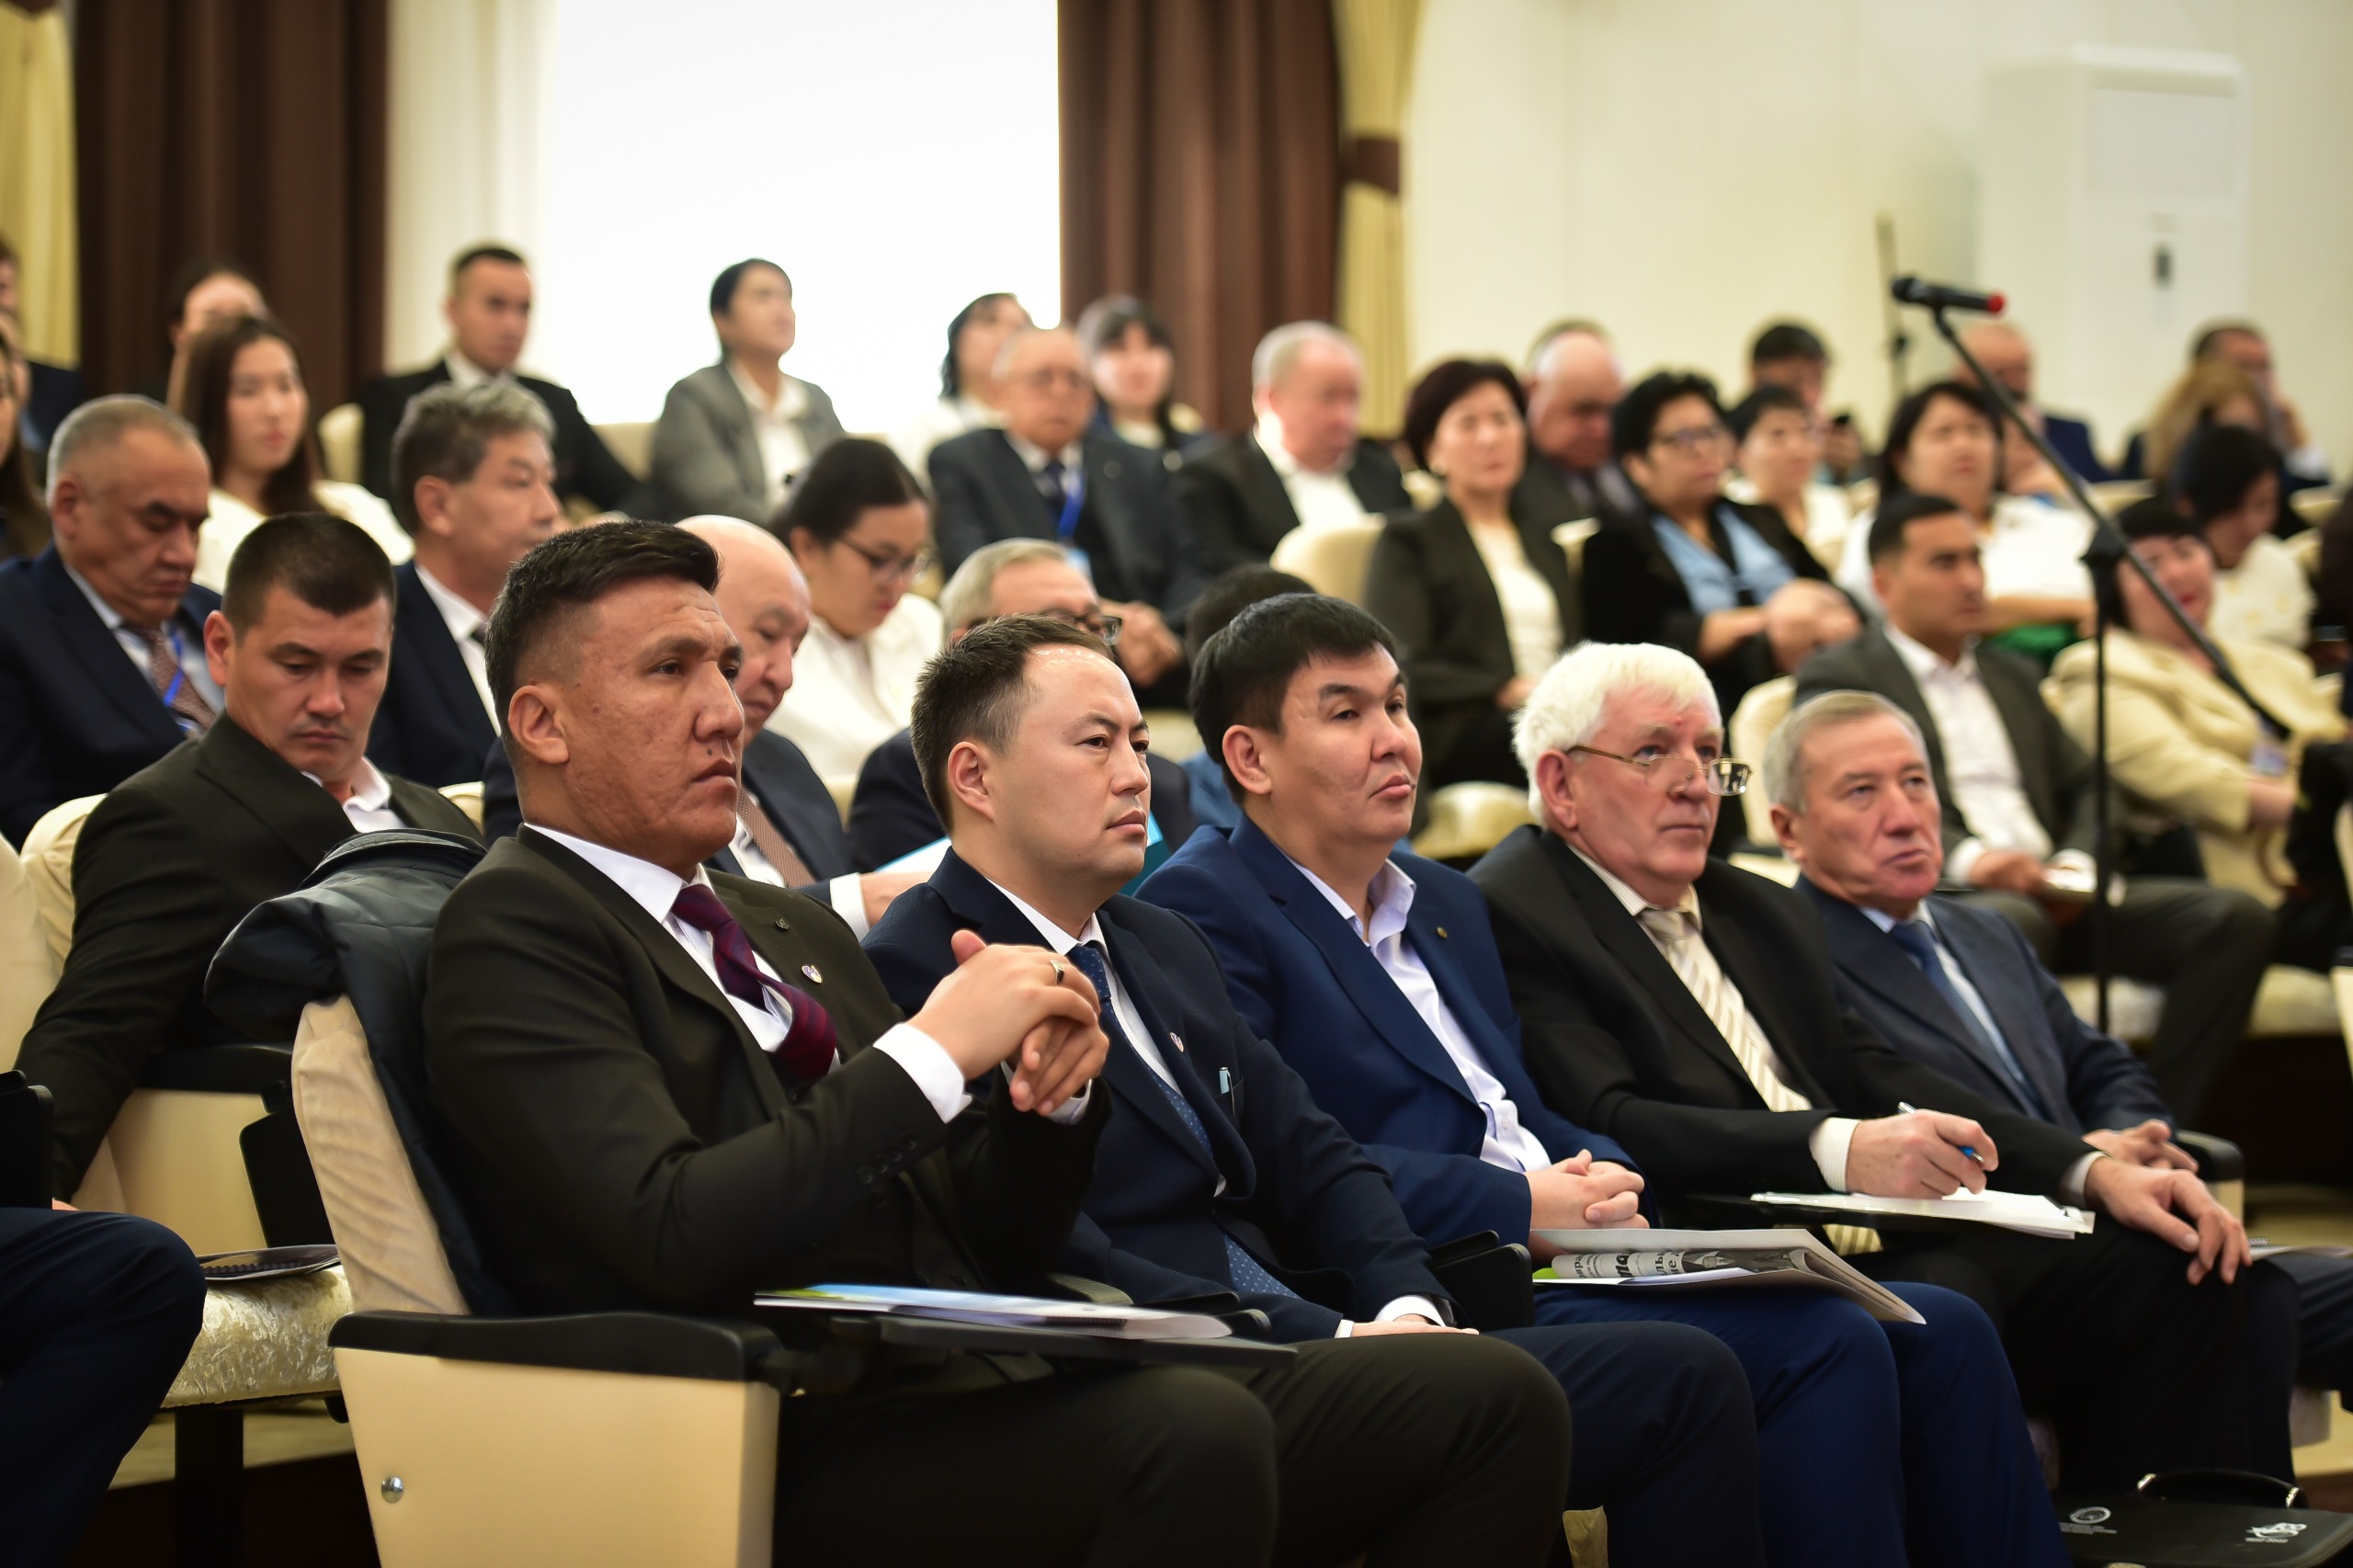 The Agrarian Faculty held the International Scientific and Practical Conference “Innovative development of the agro-industrial complex: experience, problems and ways to solve them”